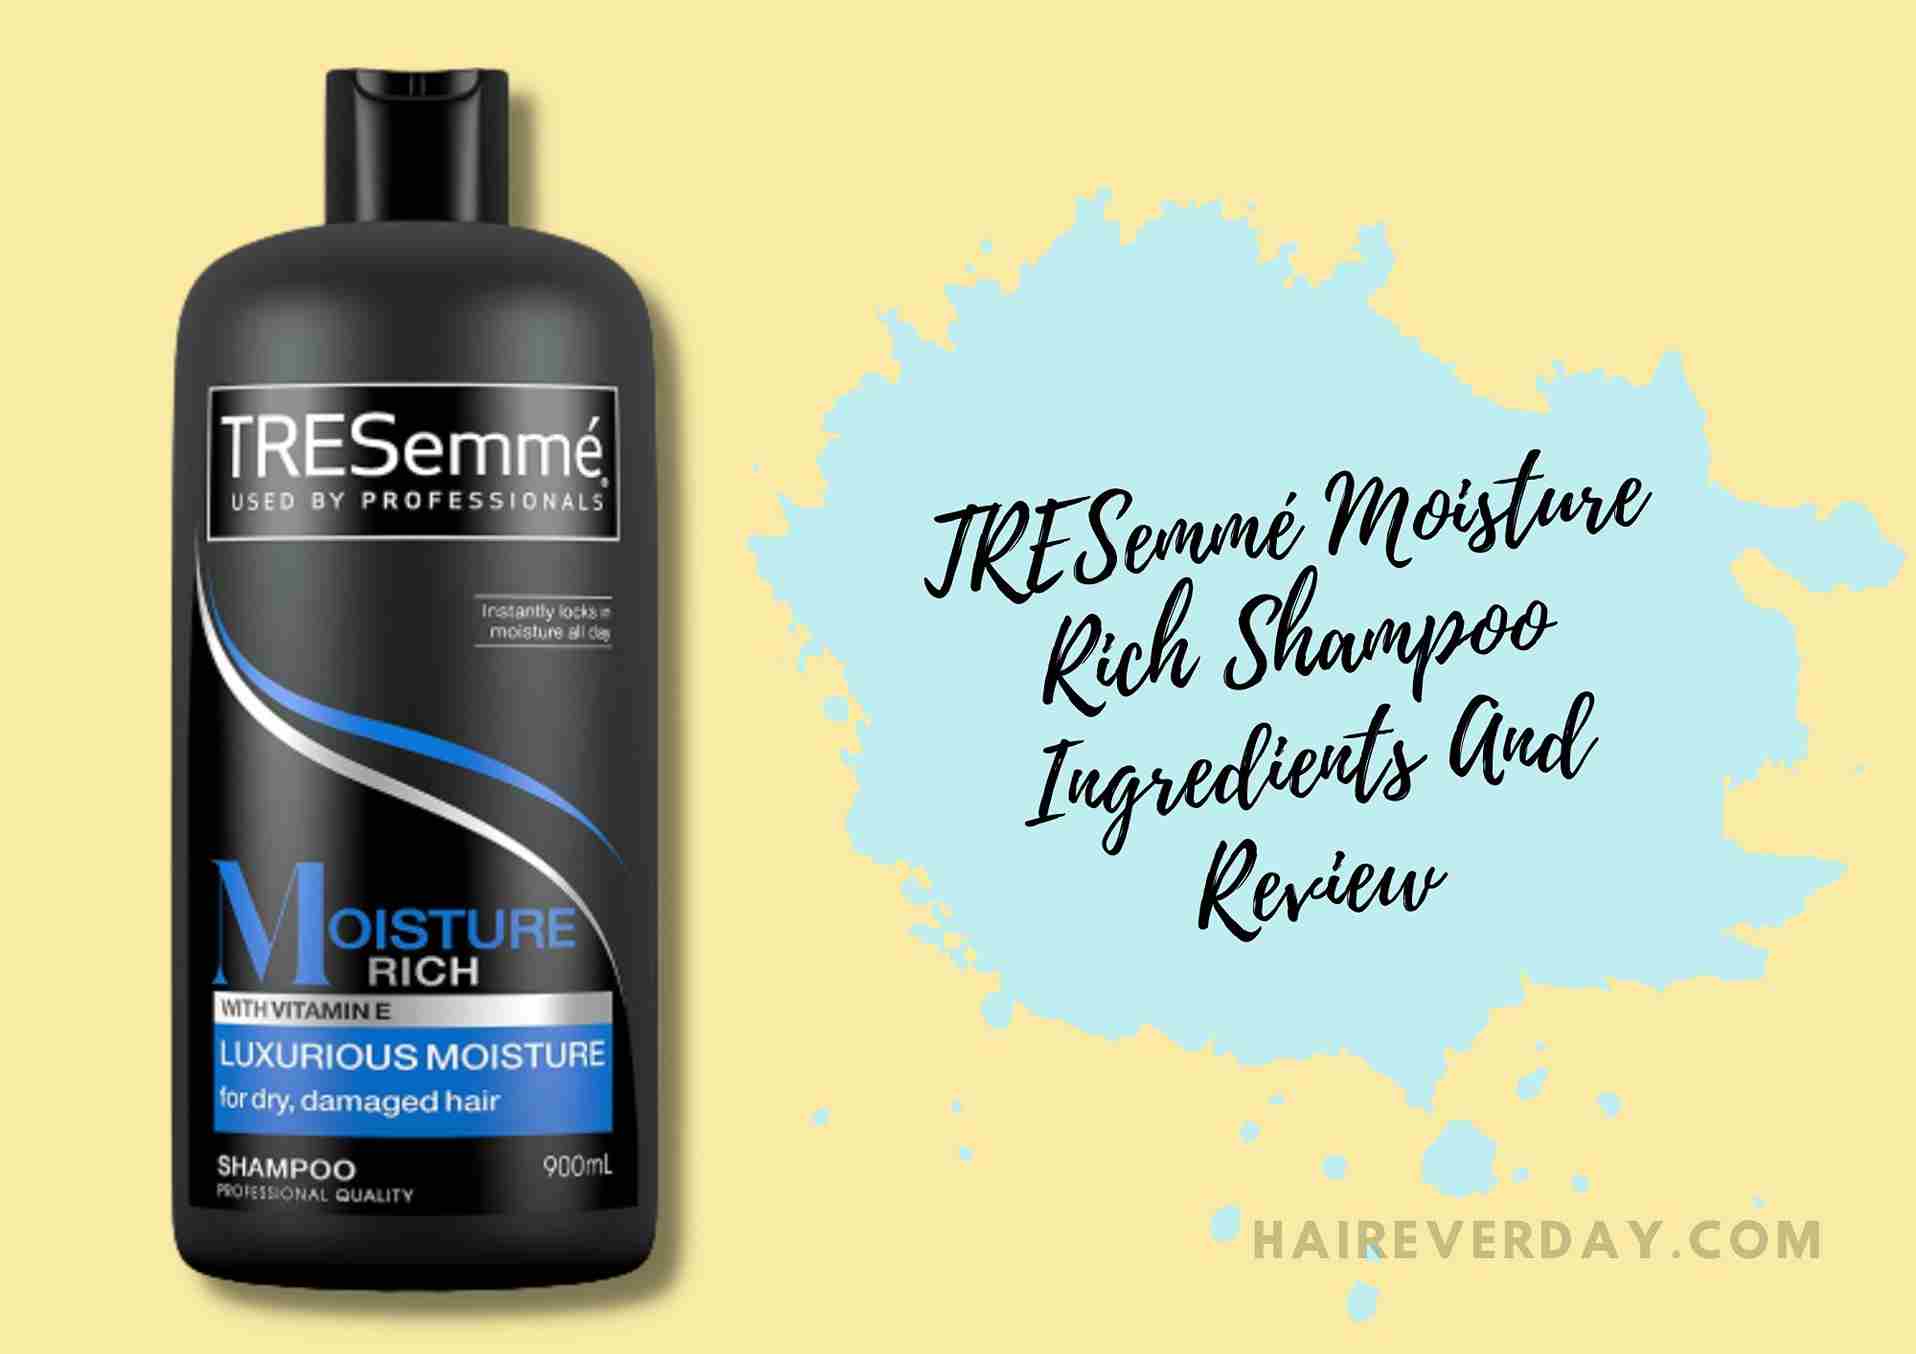 TRESemmé Moisture Rich Shampoo Ingredients + Review Hair Everyday Review